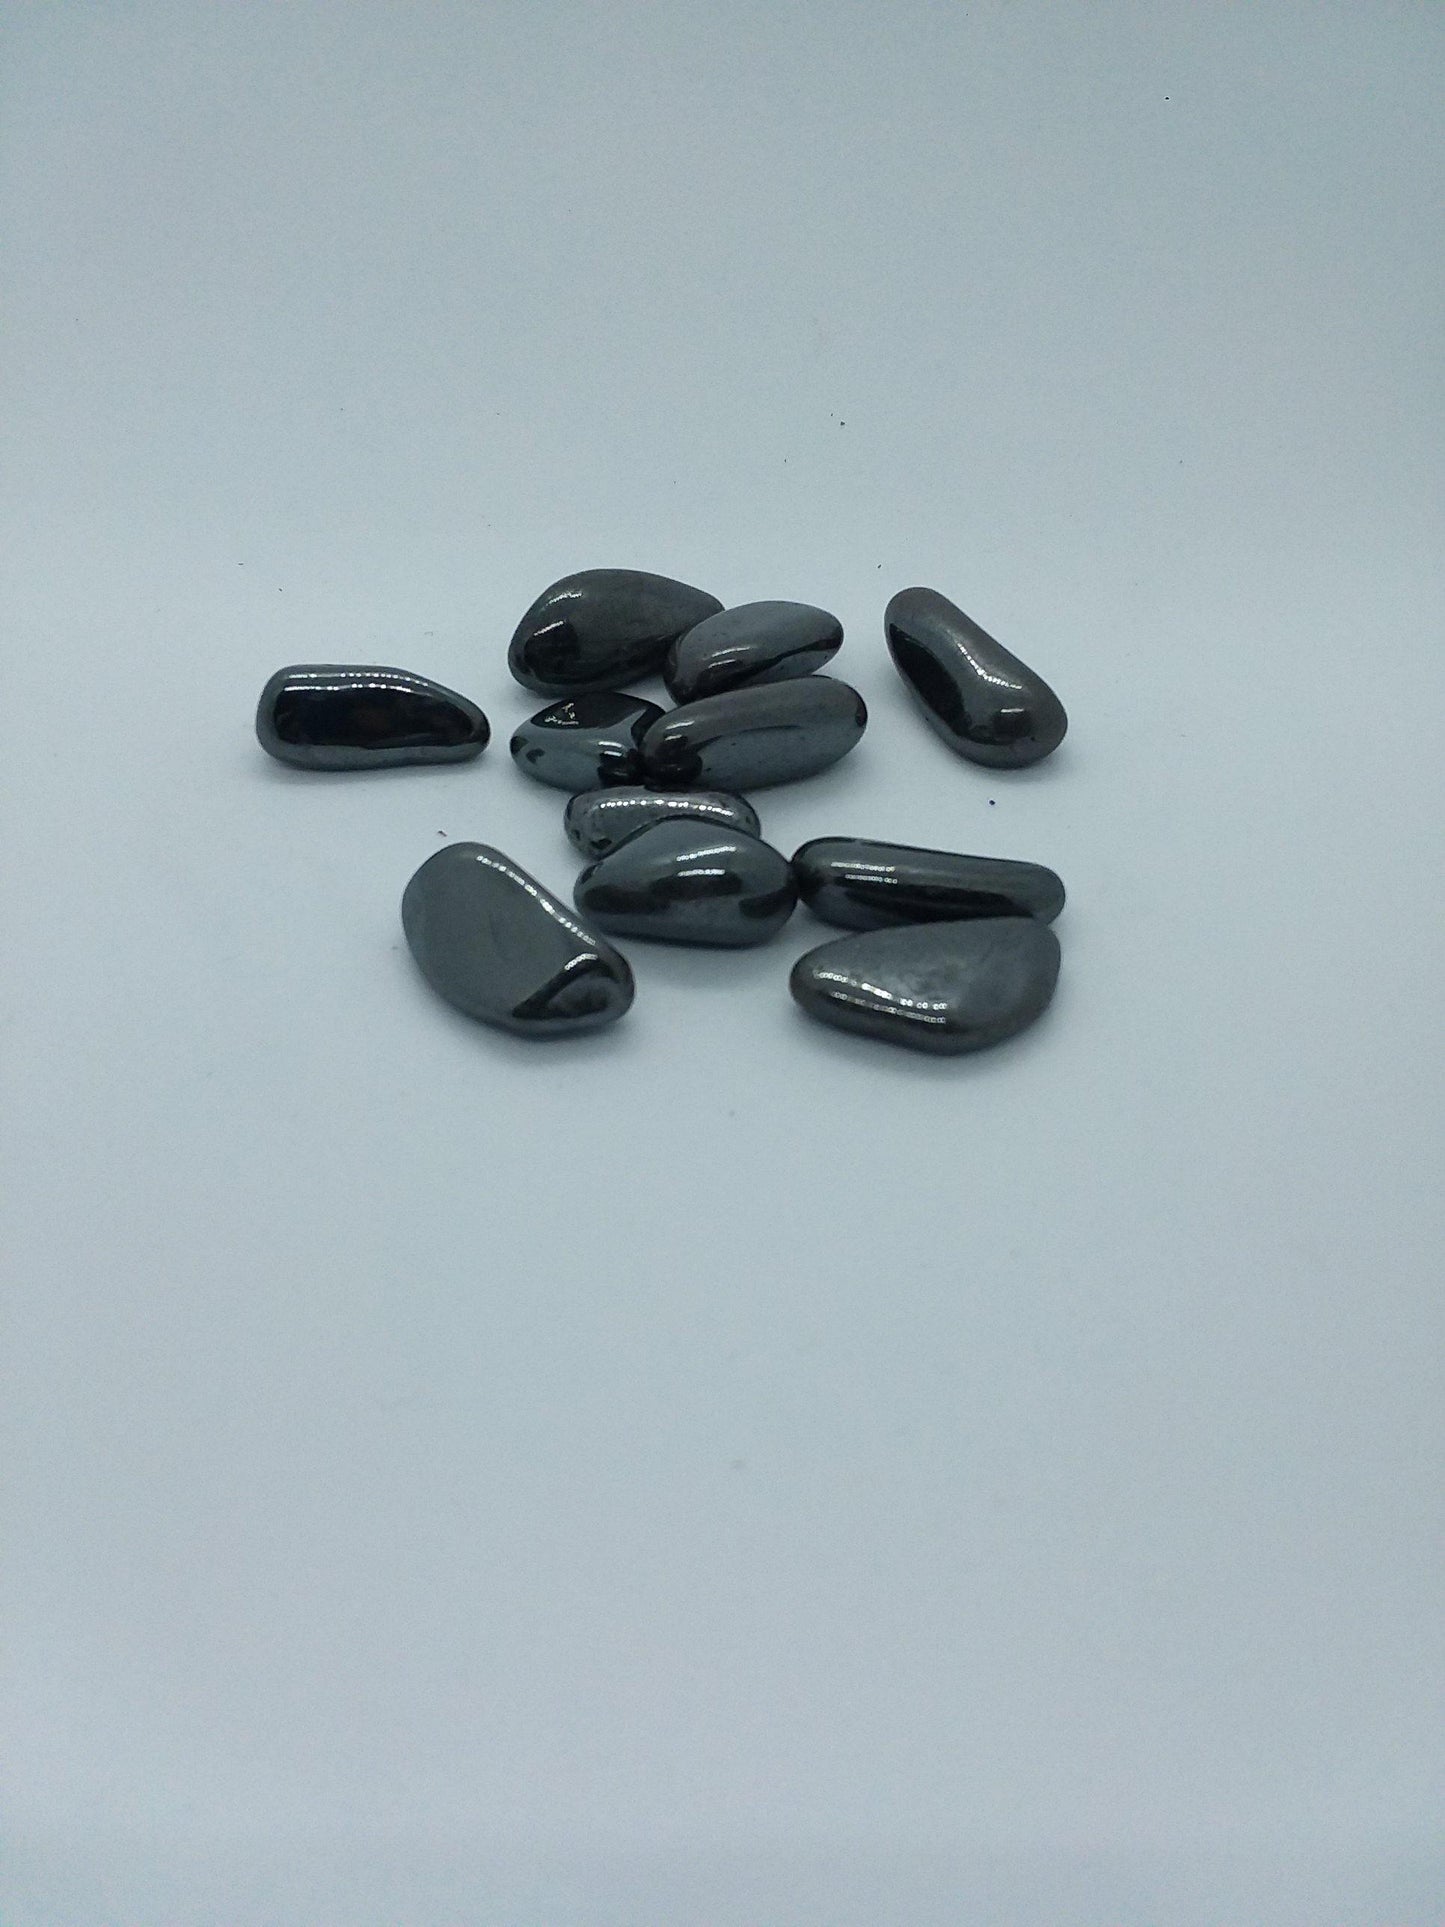  Hematite - Gemstones available at Amazing Creations Products . Grab yours for $2.00 today!